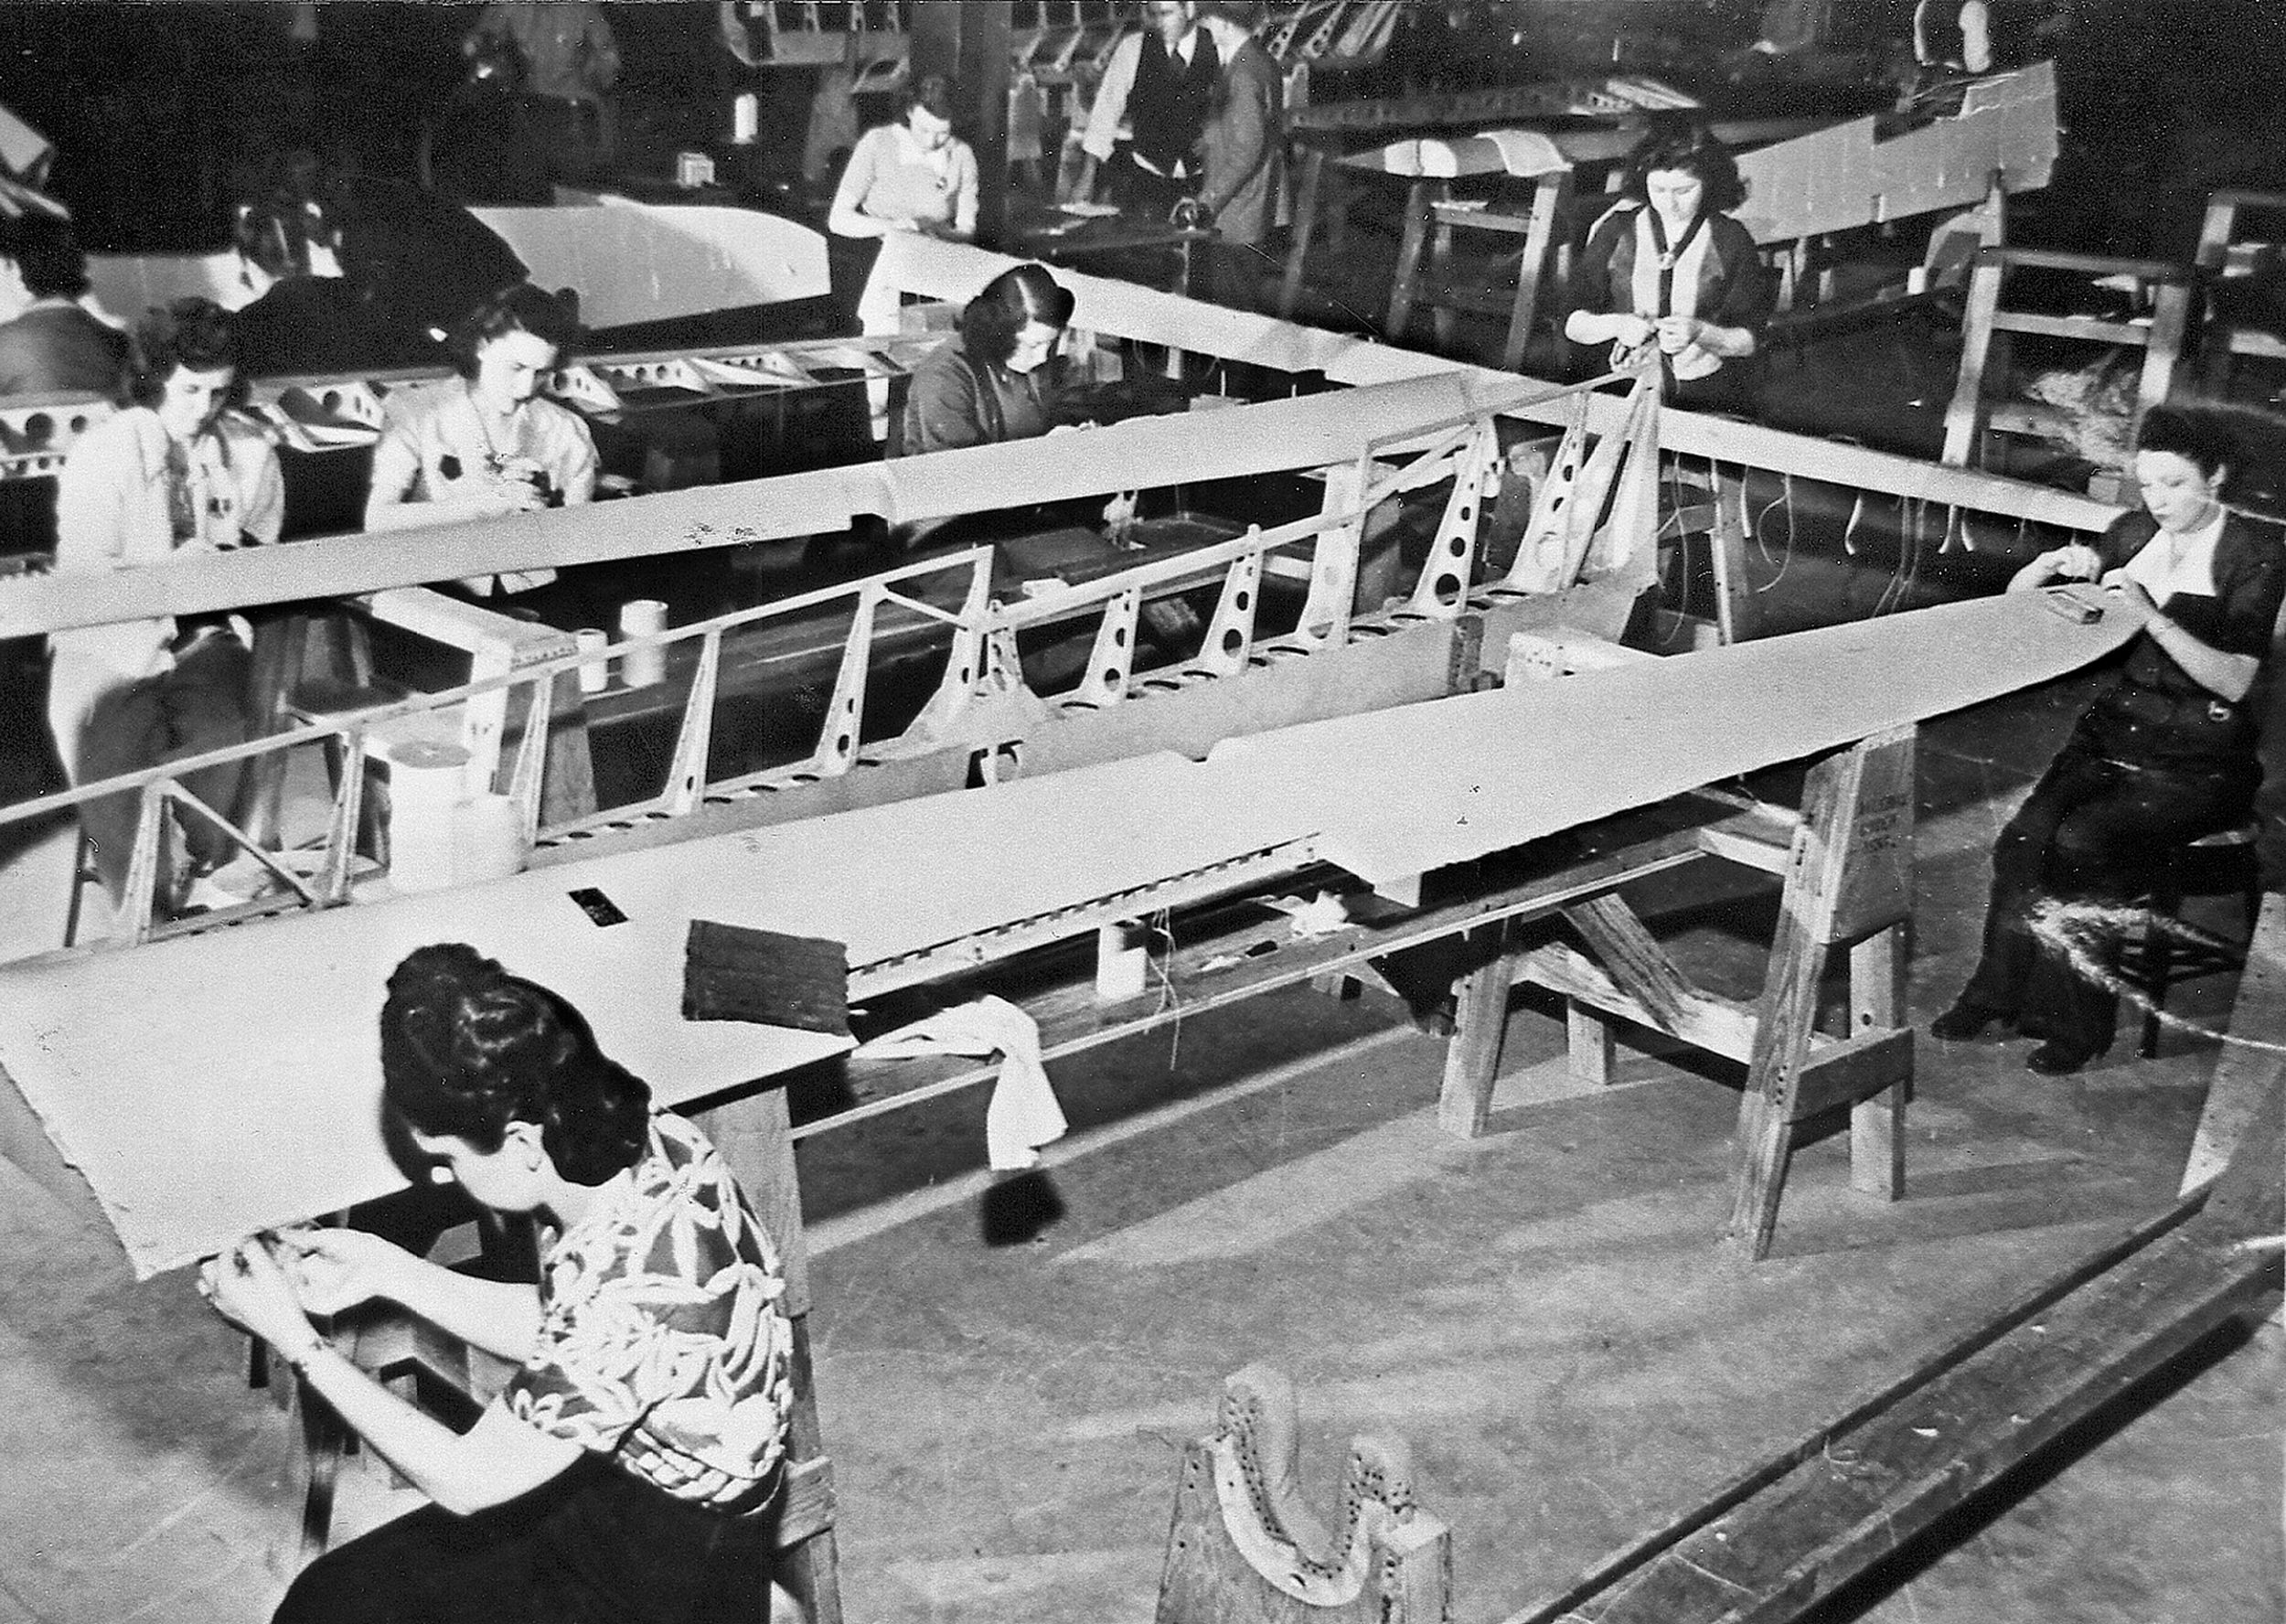 A group of women build a CG-4A glider wing at the Villaume Box and Lumber Company in St. Paul, Minnesota.